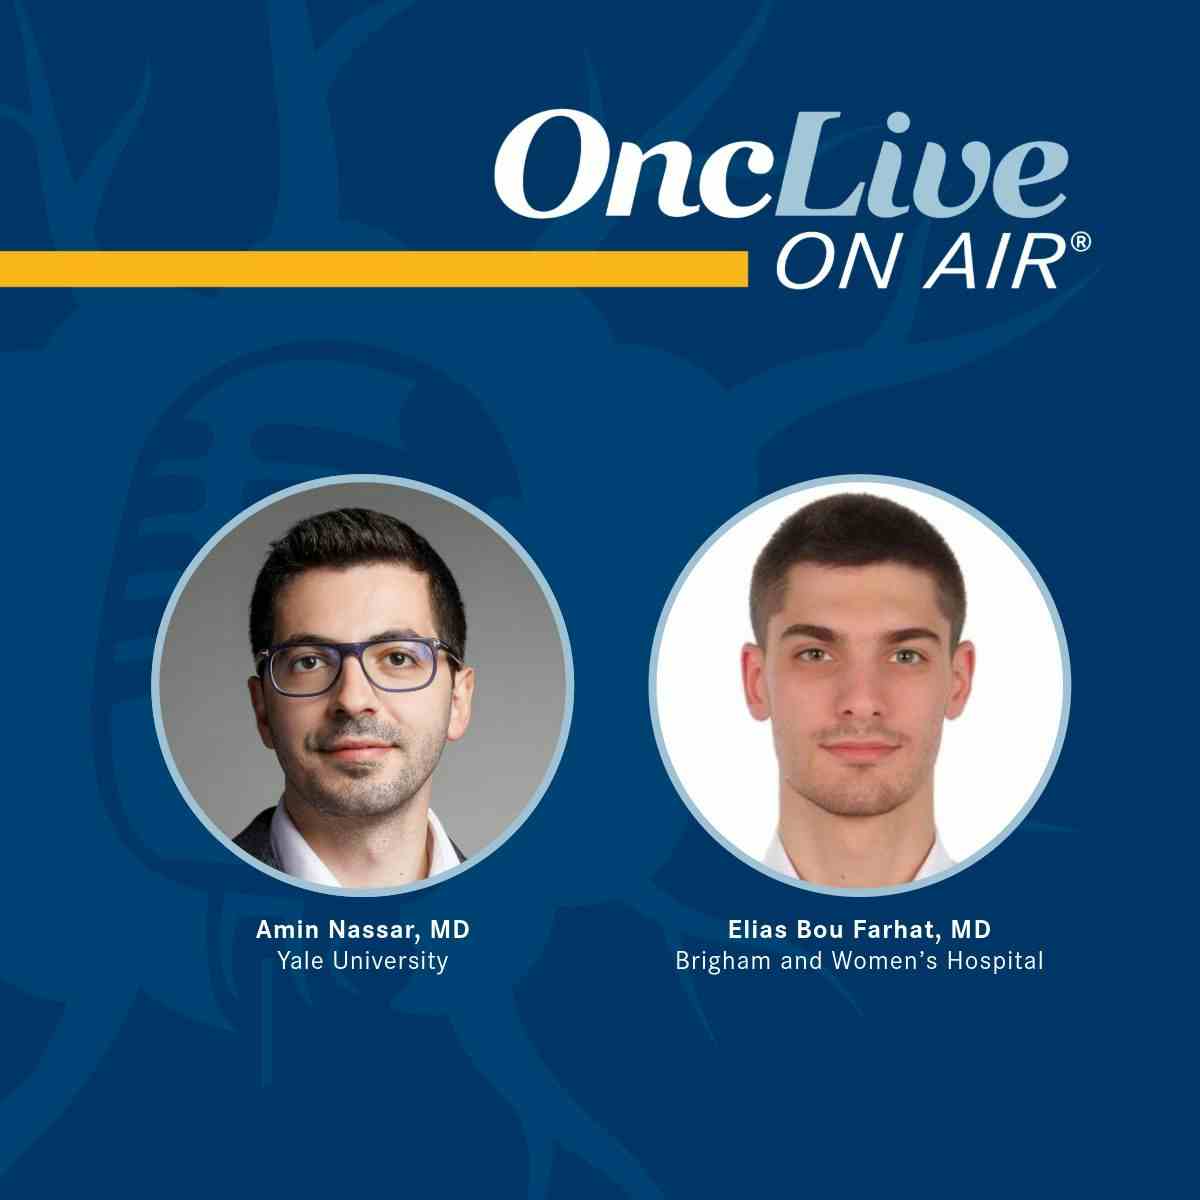 Amin Nassar, MD, hematology/oncology fellow, Yale University; Elias Bou Farhat, MD, postdoctoral research fellow, Department of Medicine, Brigham and Women’s Hospital 